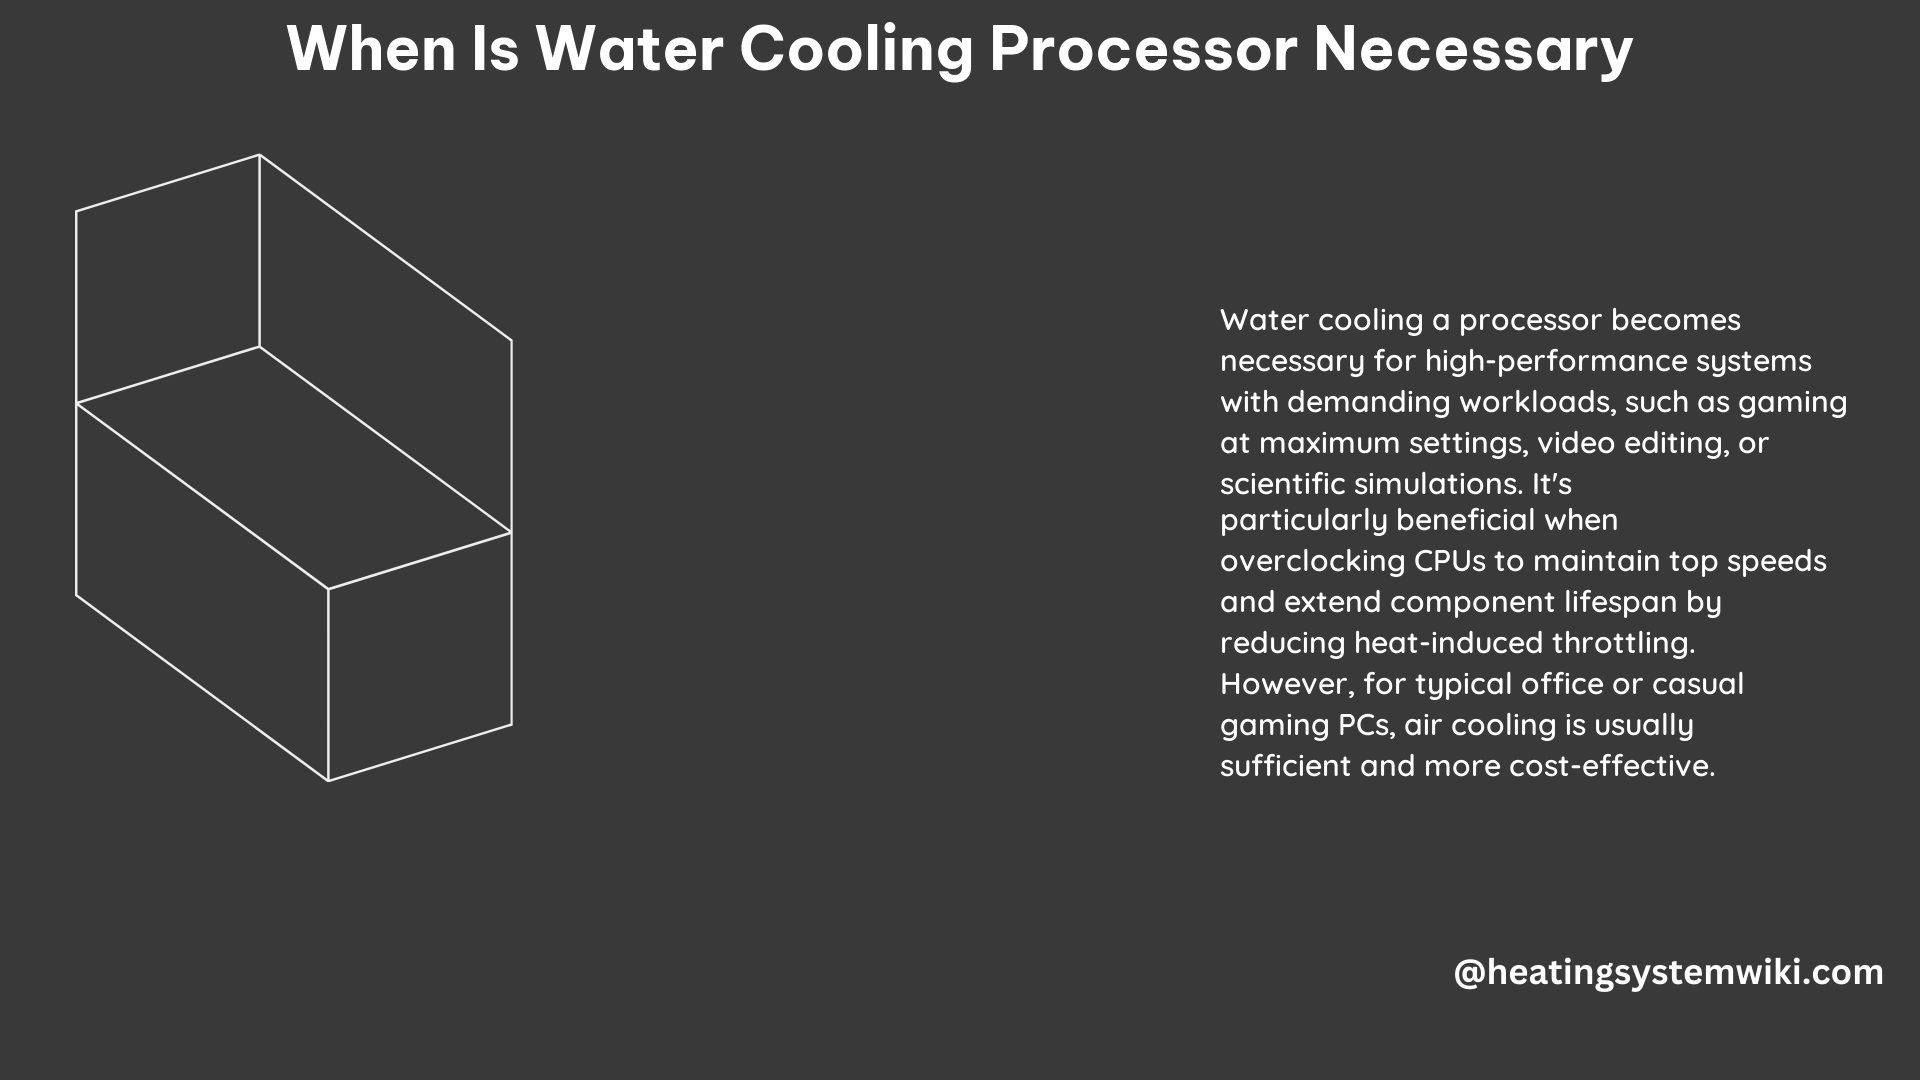 When Is Water Cooling Processor Necessary